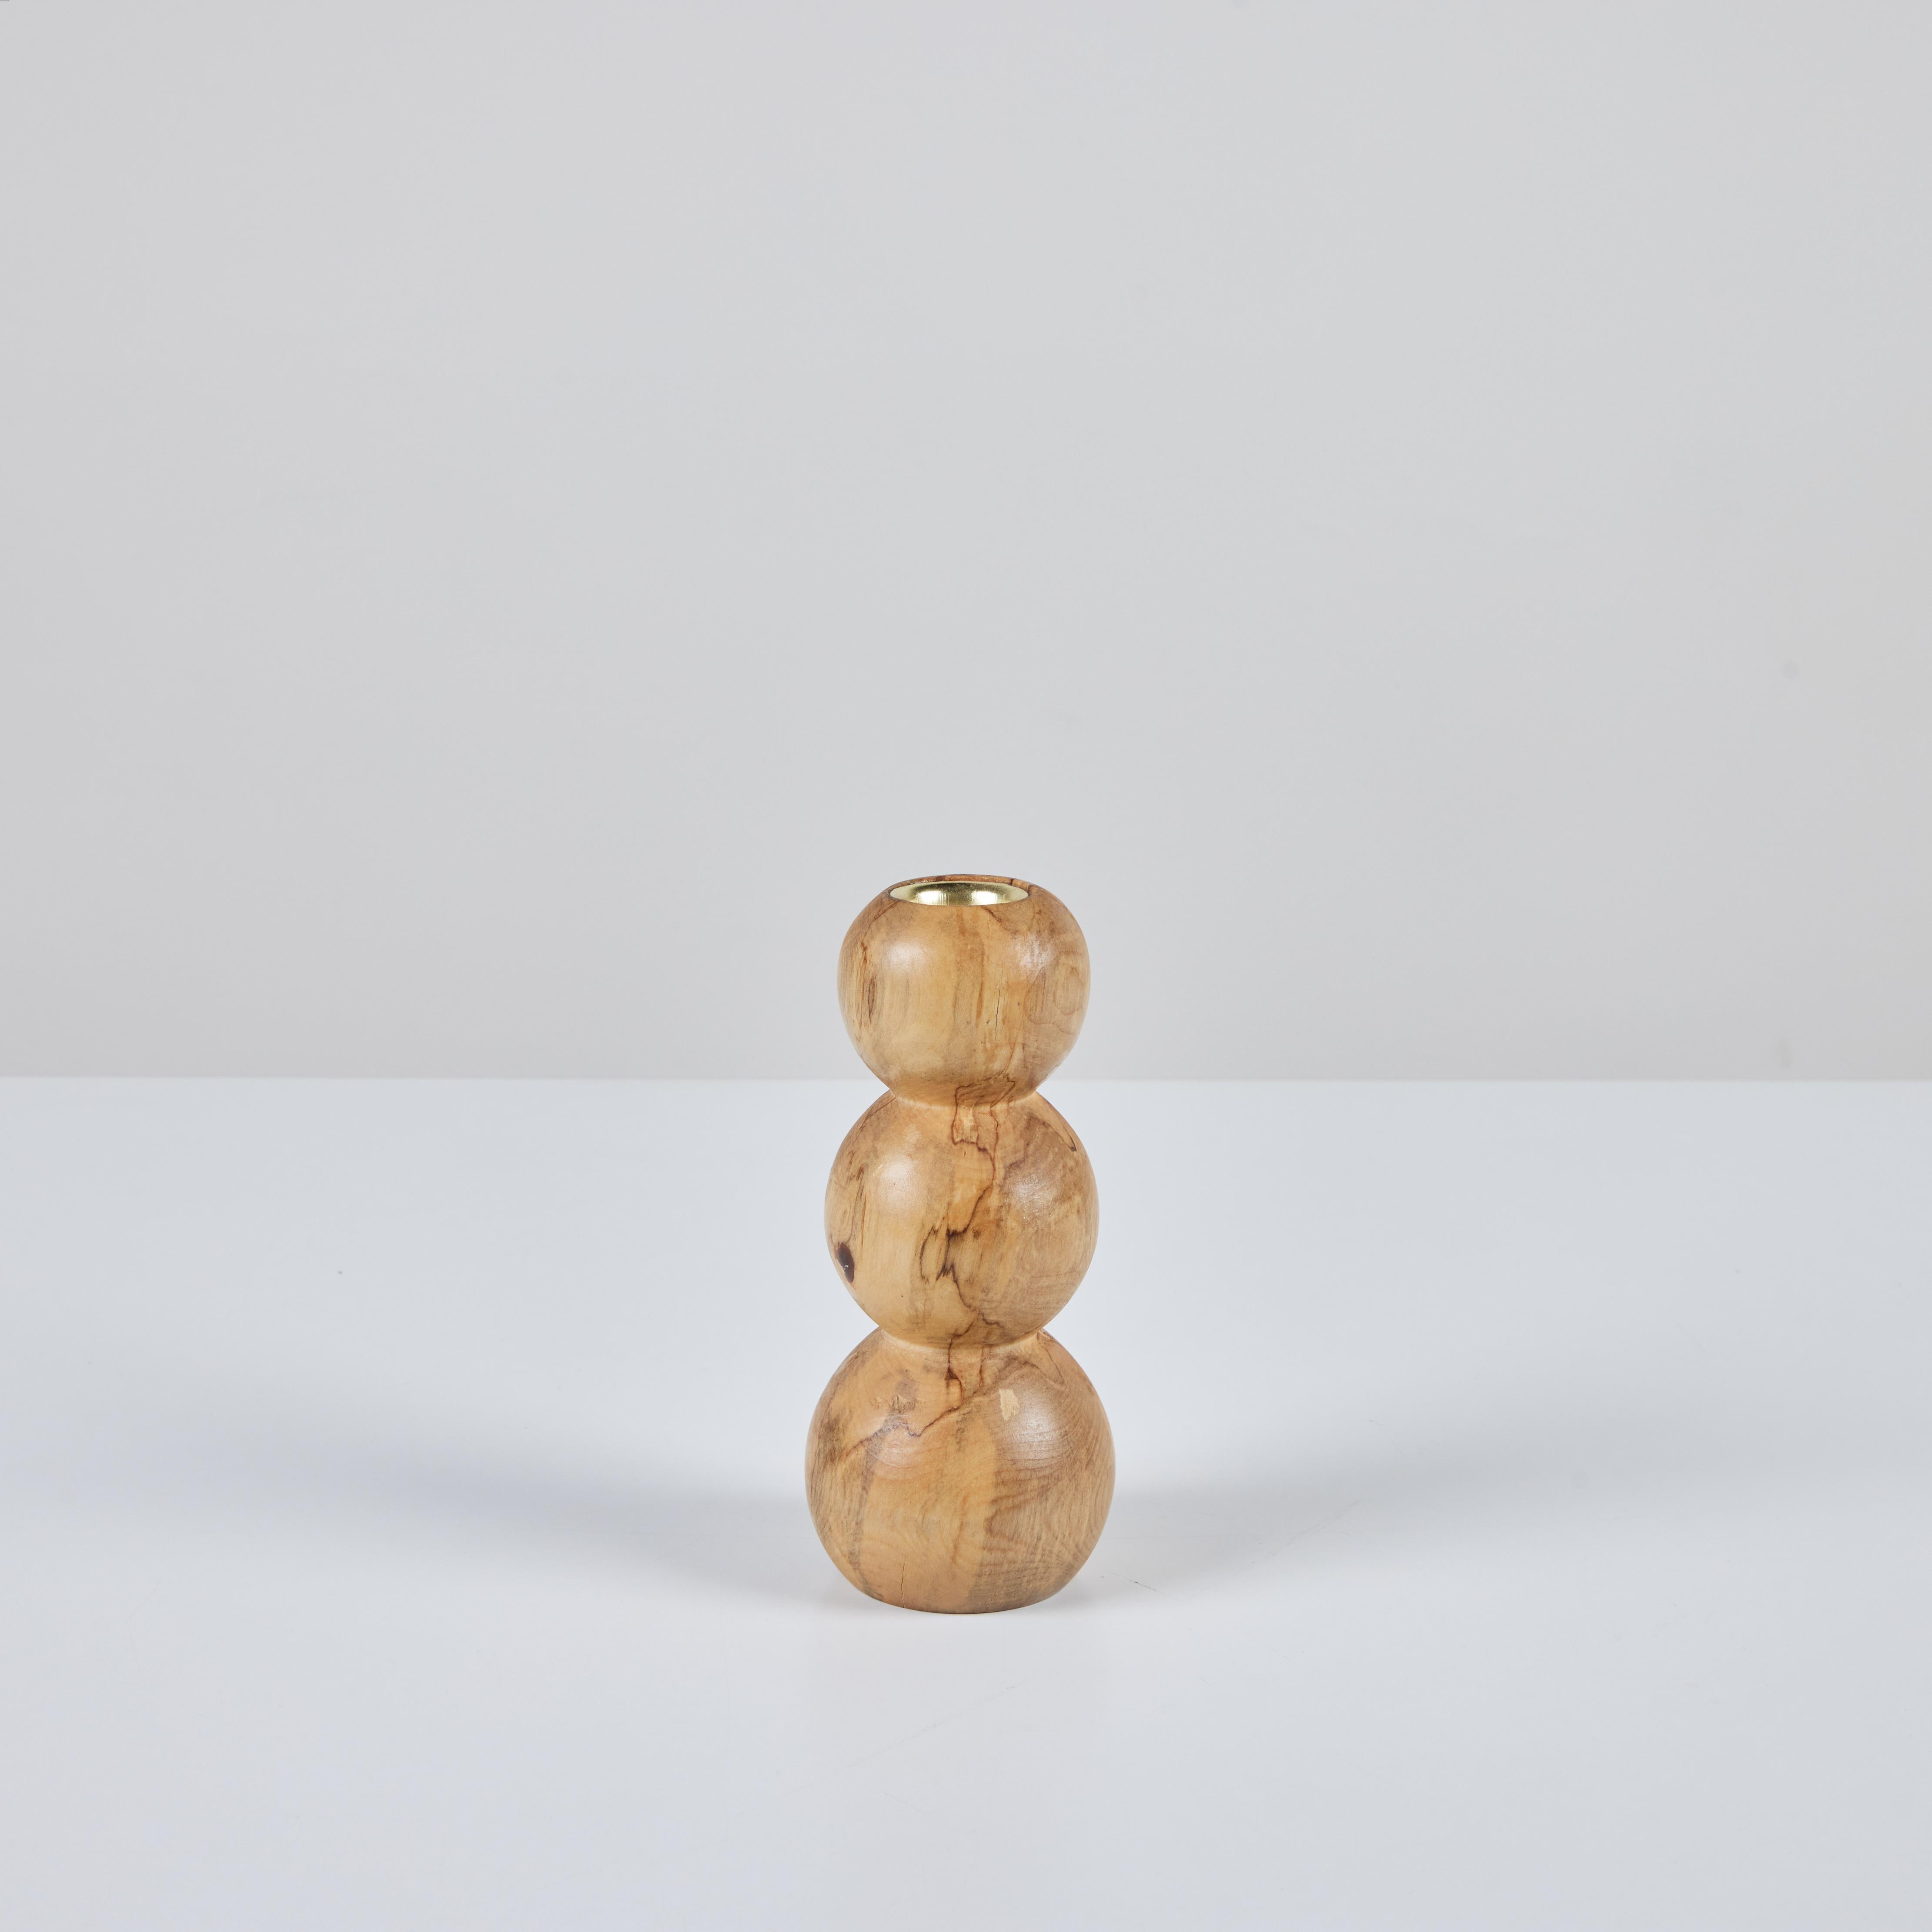 Hand-Crafted Hand Turned Spalted Birch Bubble Candlestick Holder by Evan Segota For Sale